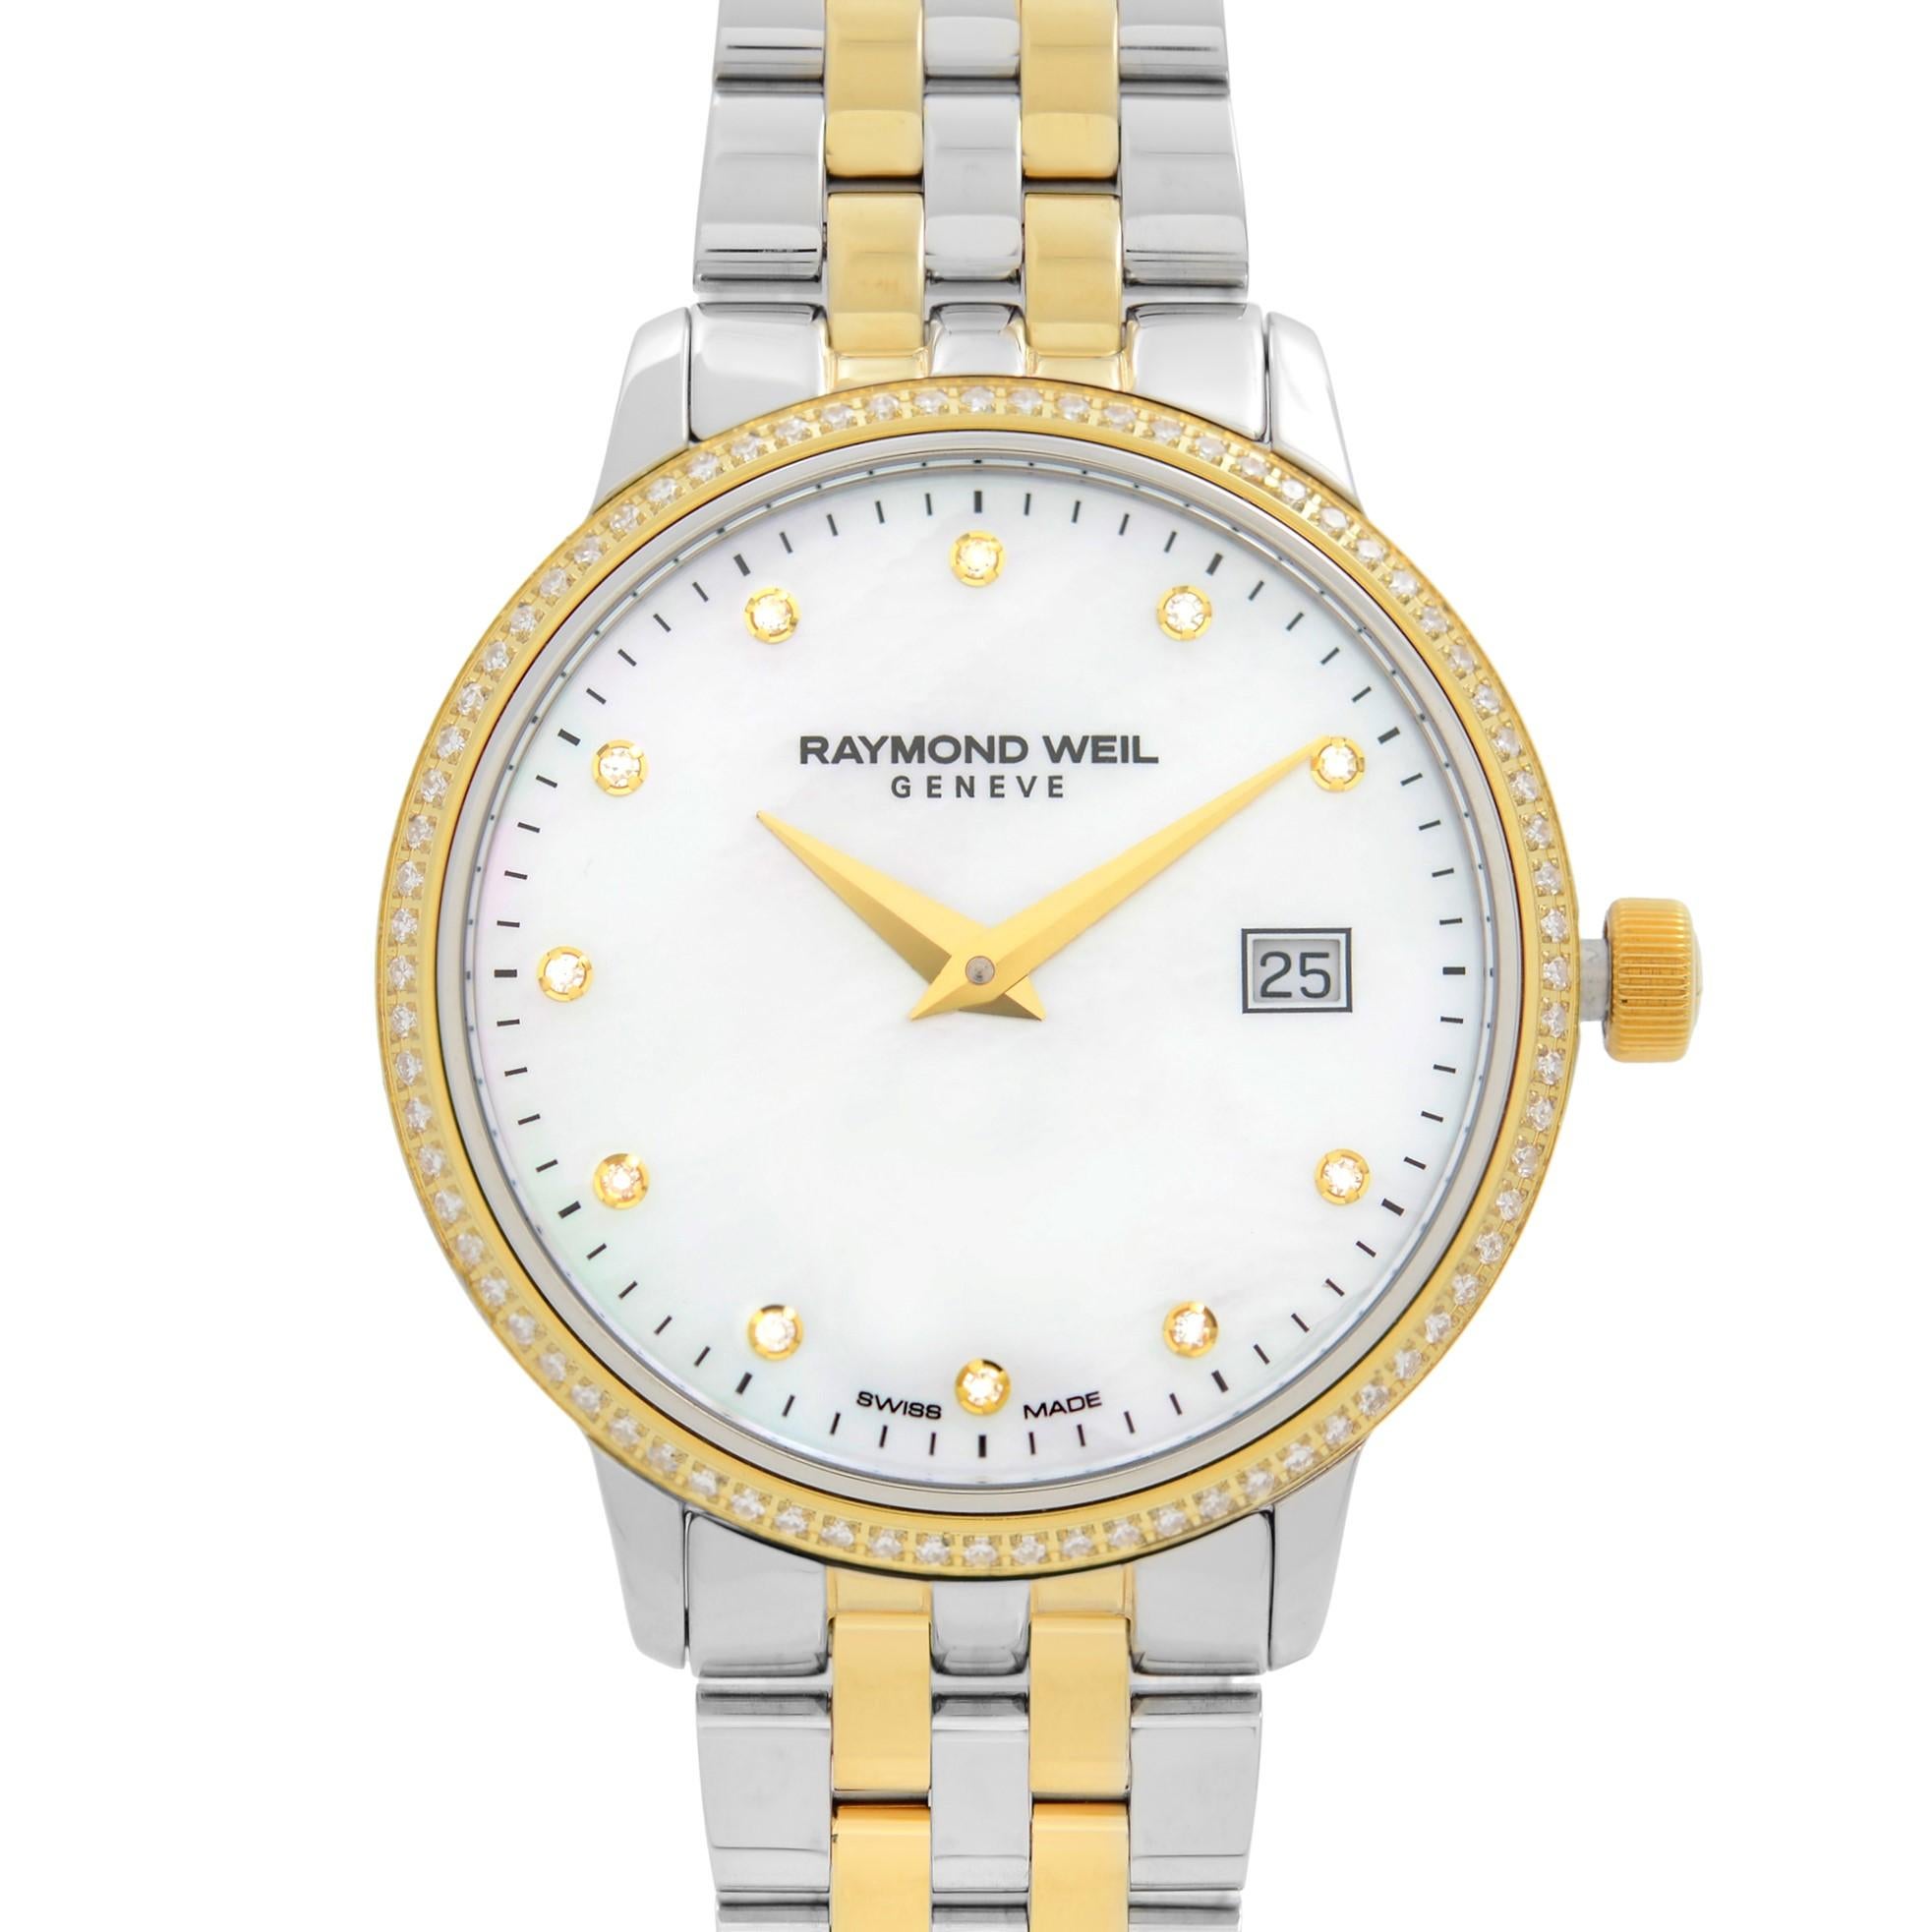 Store Display Model Never Worn. Can have minor blemishes on gold tone parts. Raymond Weil Toccata Two-Tone Steel MOP Dial Quartz Ladies Watch 5988-SPS-97081. This Beautiful Timepiece Features: Stainless Steel Case and a Two-Tone (Silver-Tone and